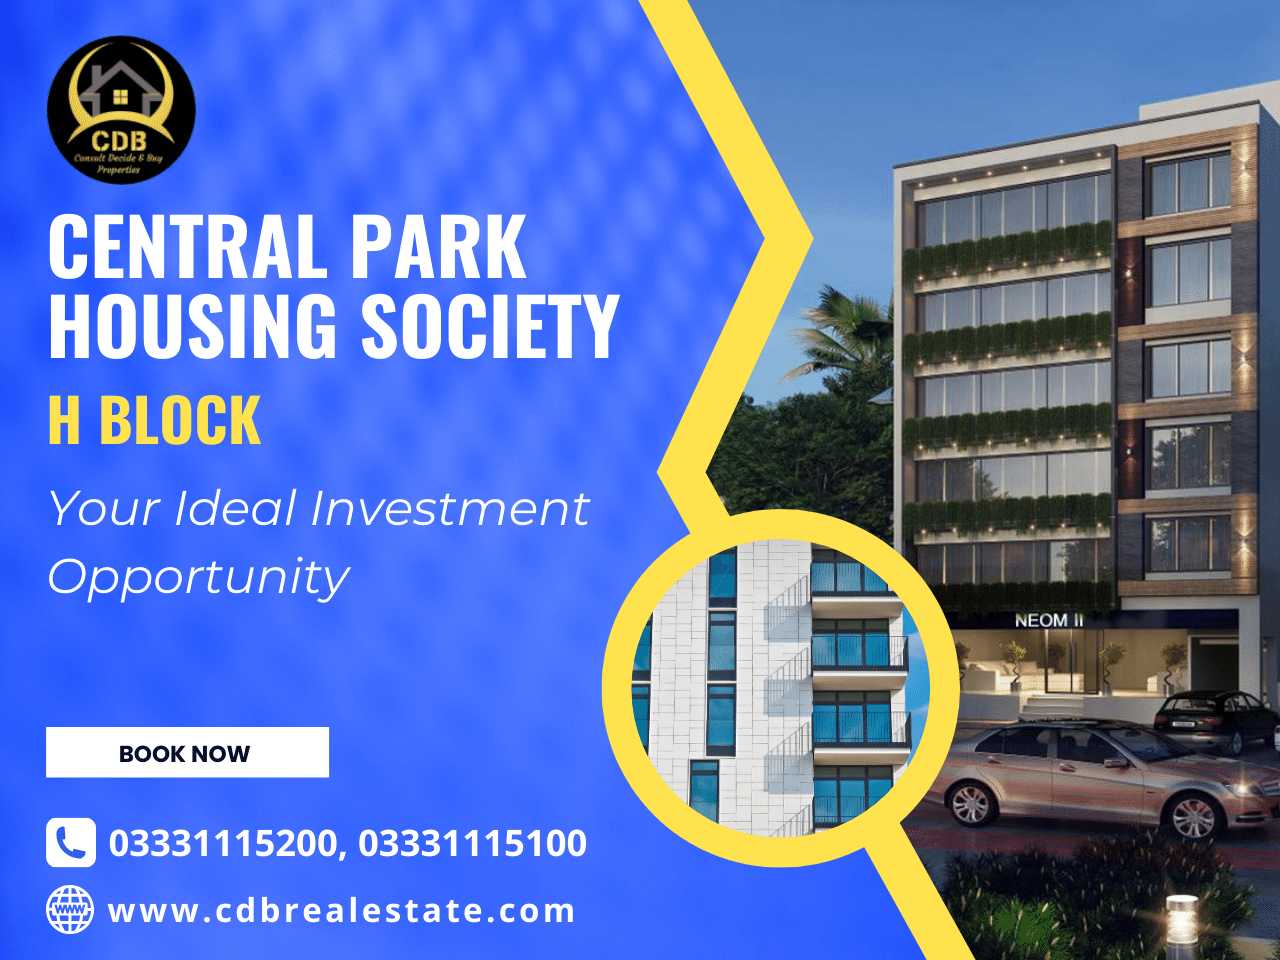 Central Park Housing Society H Block: Your Ideal Investment Opportunity